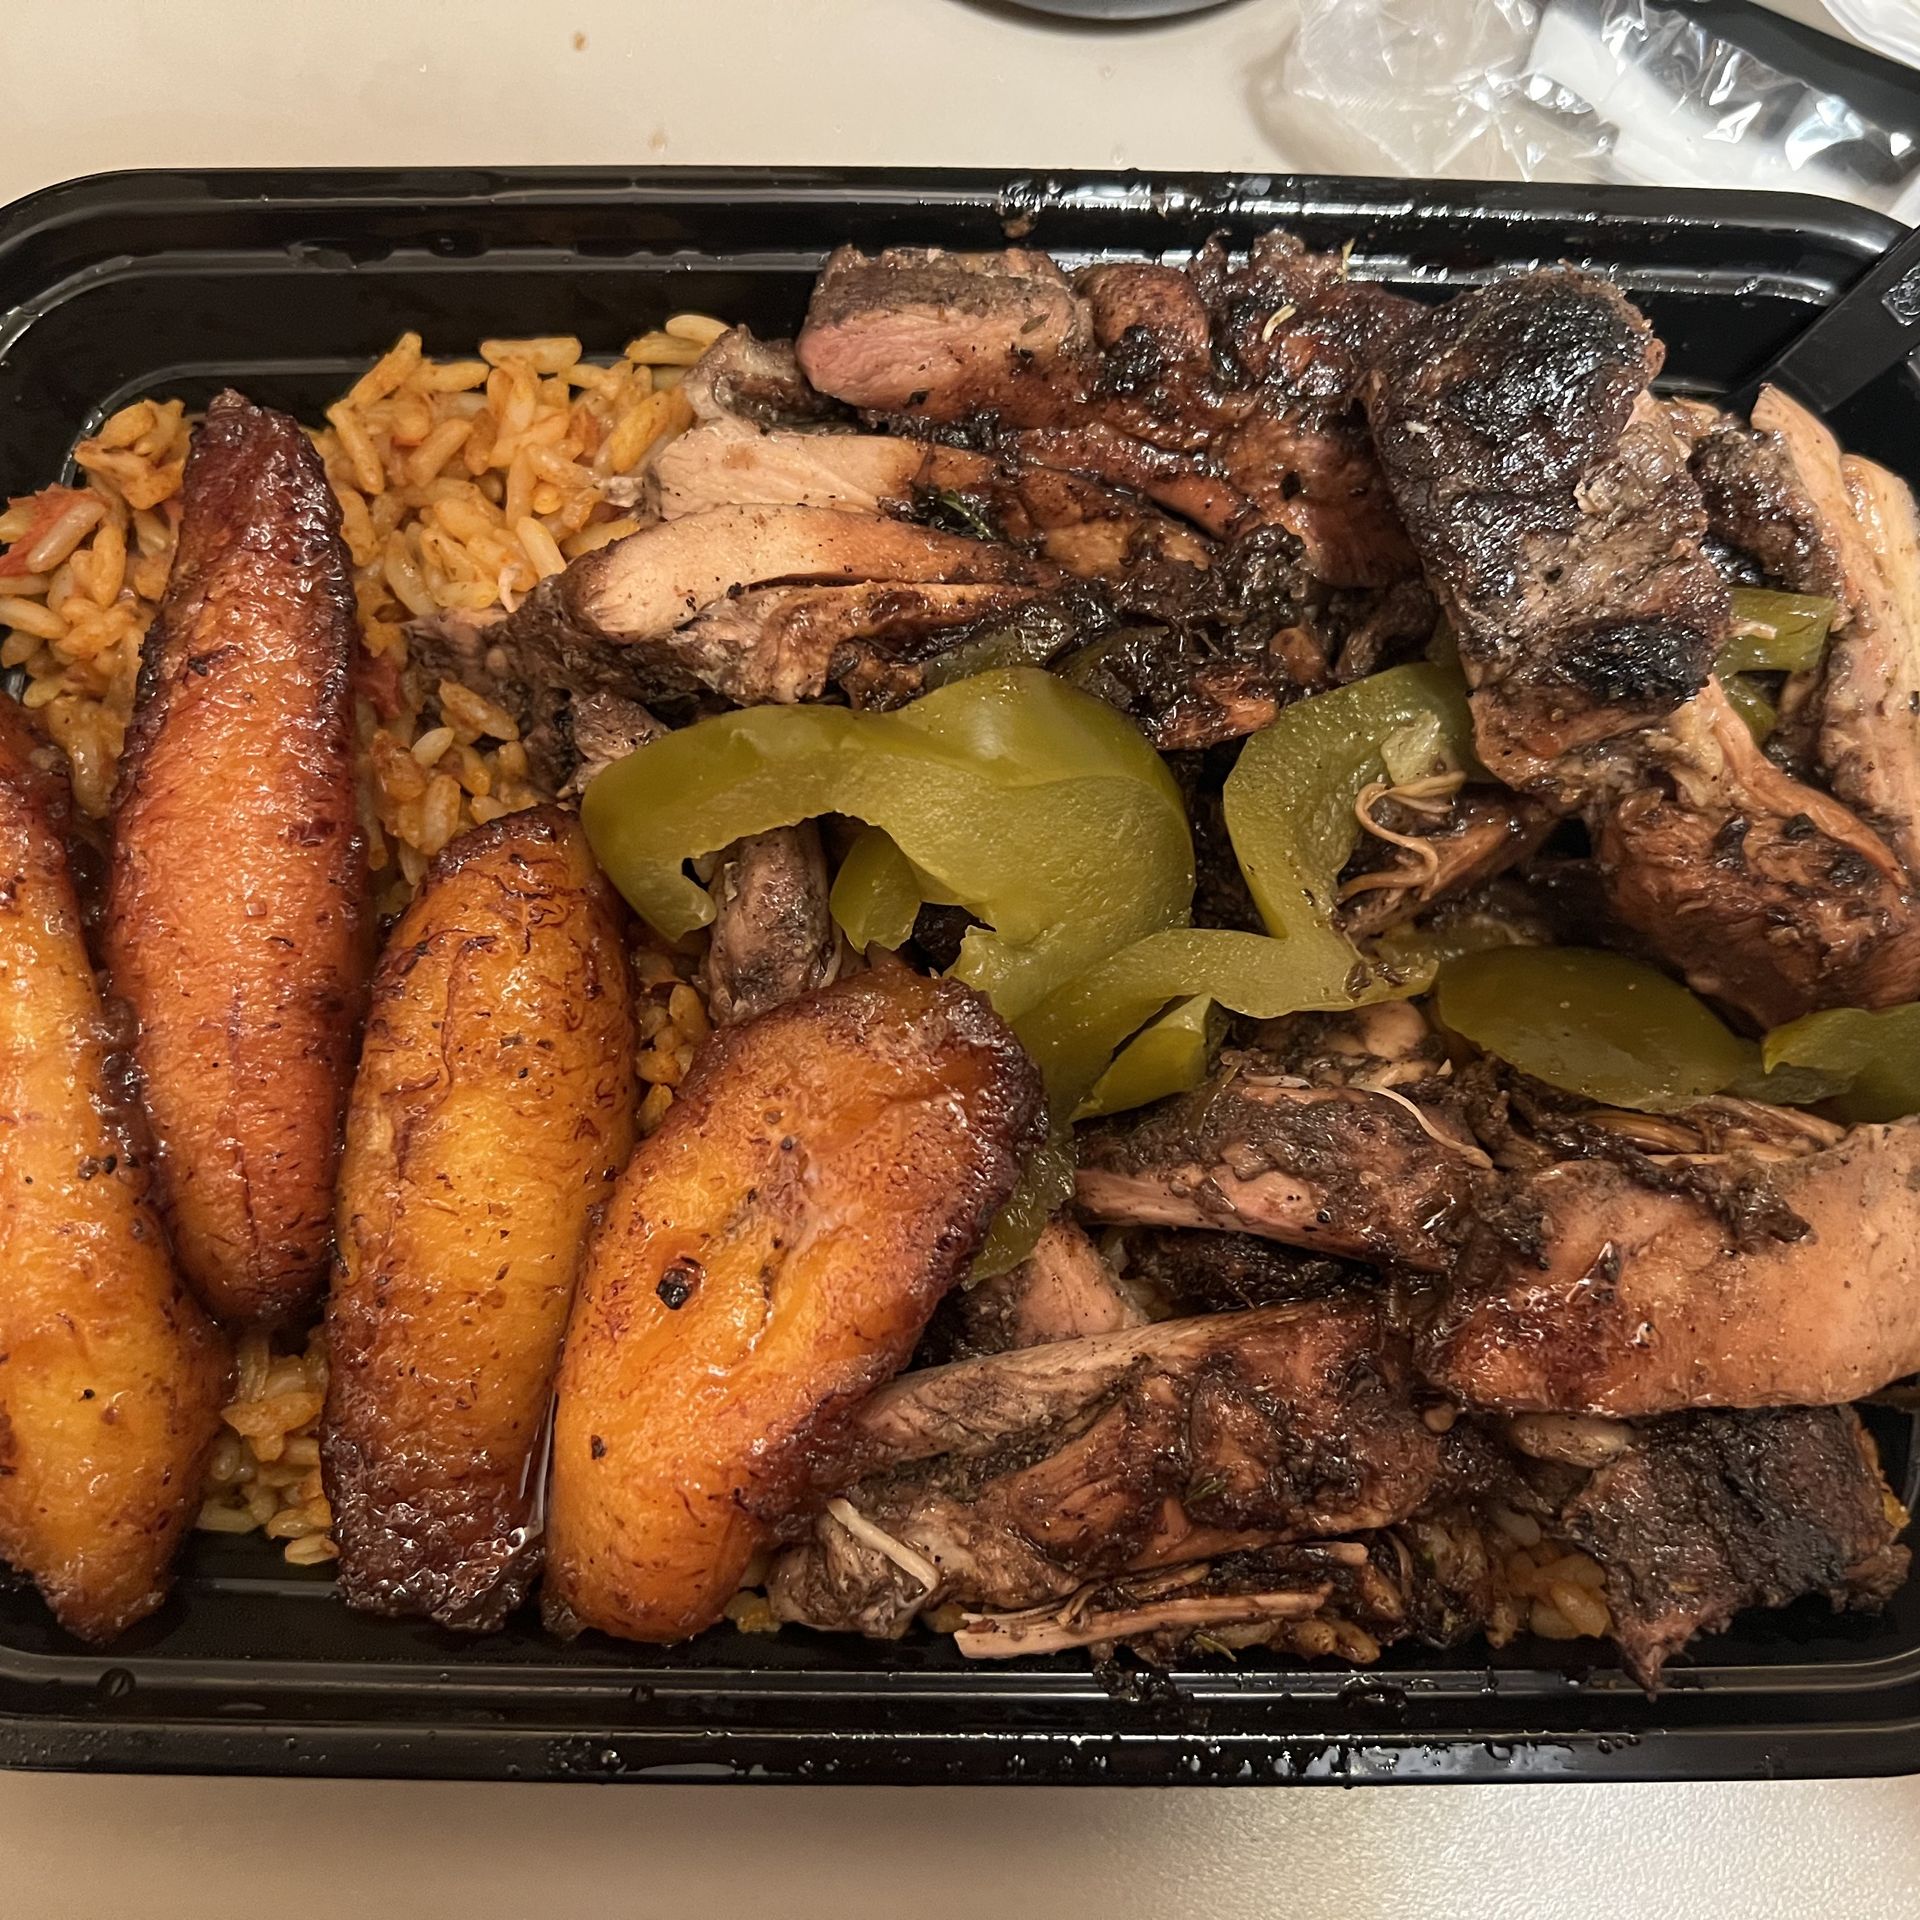 Spicy jerk chicken and jollof rice with sweet plantains. Photo: Samuel Robinson/Axios